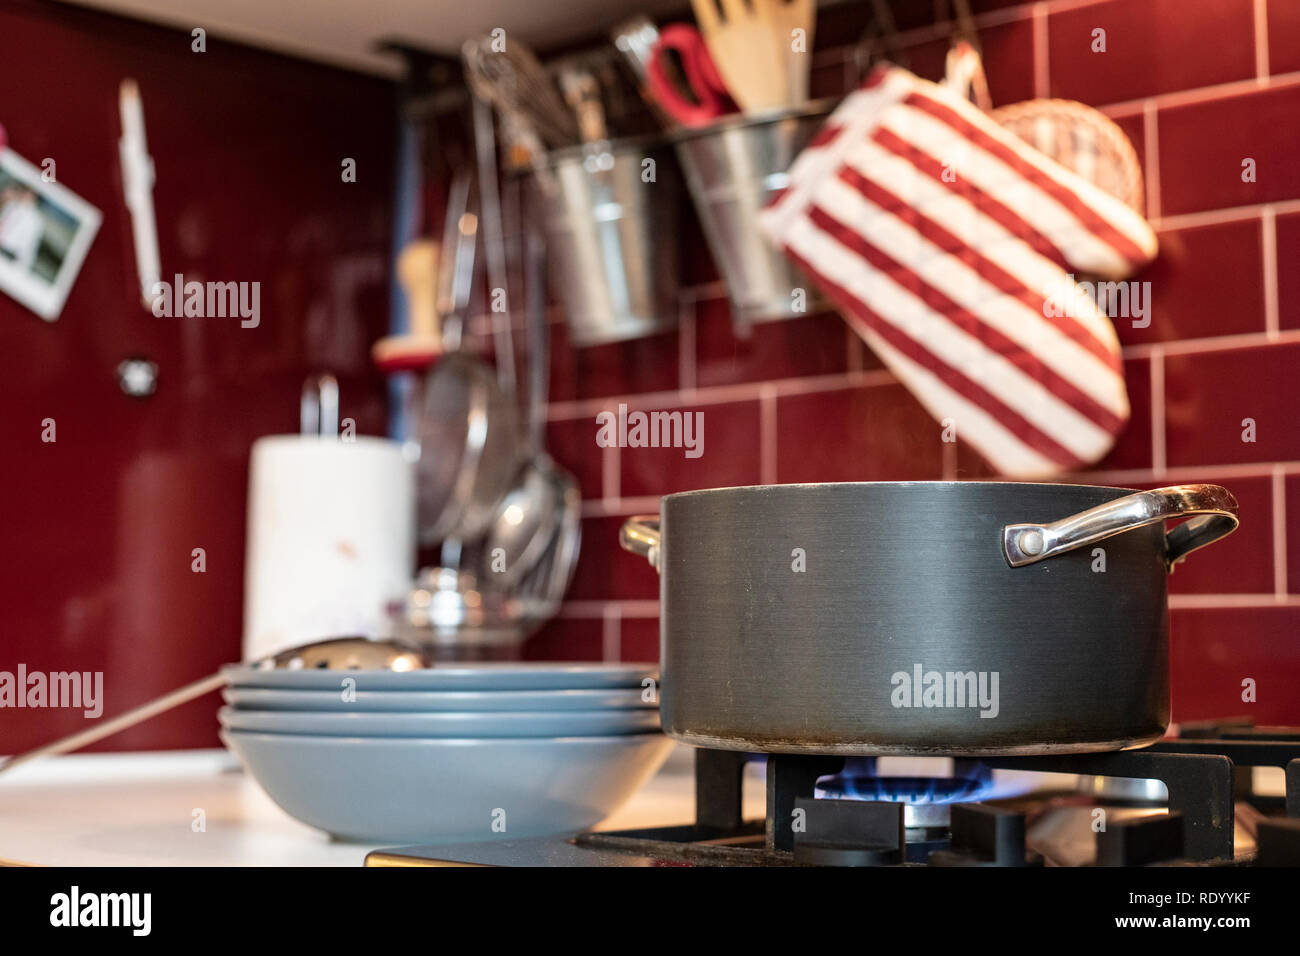 https://c8.alamy.com/comp/RDYYKF/grey-cooking-pot-on-gas-stove-with-steam-releasing-and-blue-dishes-on-the-side-in-red-burgundy-classic-kitchen-with-tools-in-the-background-RDYYKF.jpg